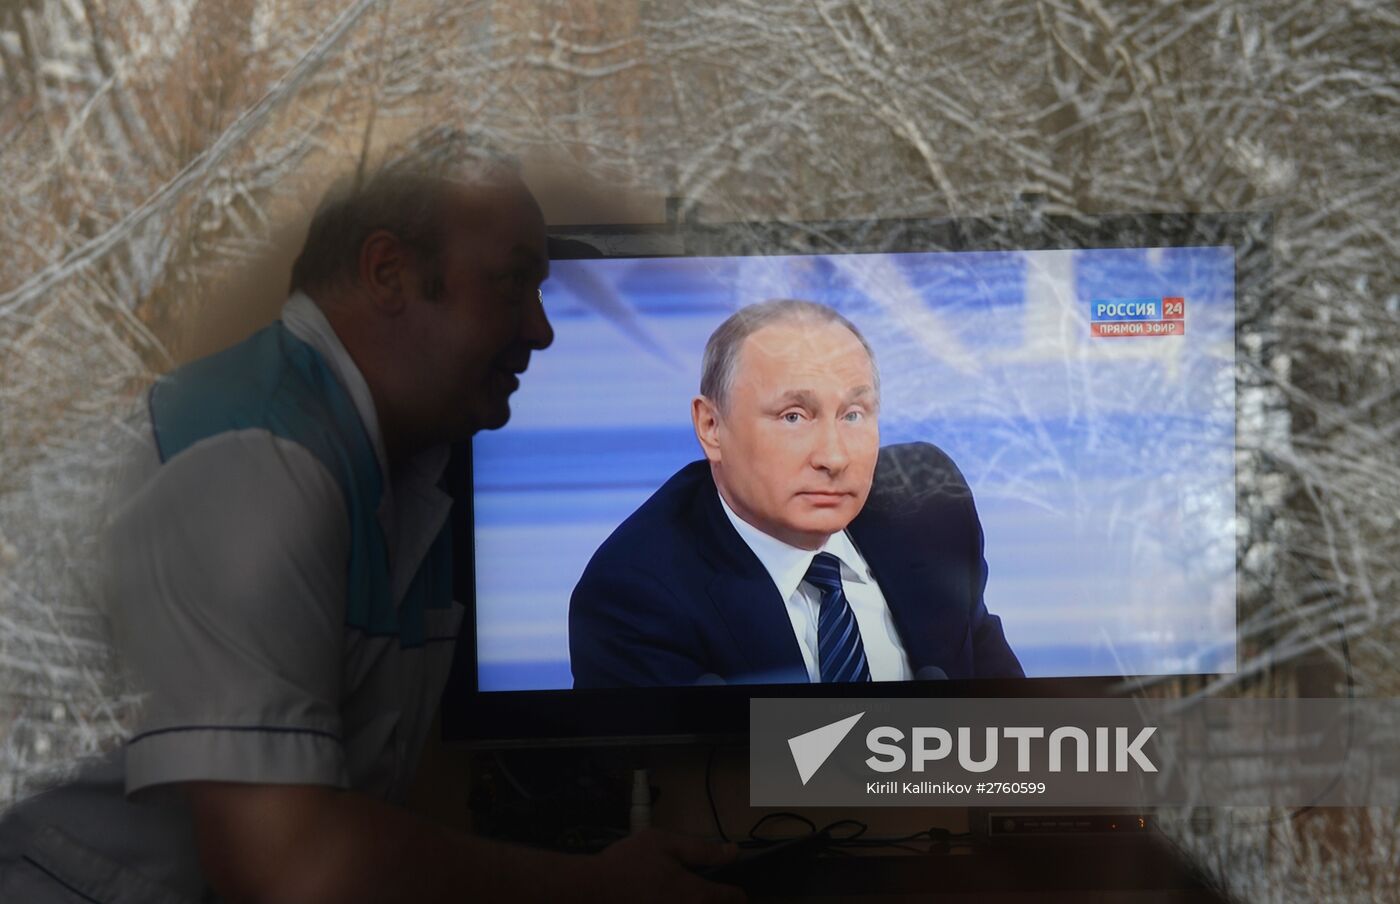 Broadcast of annual news conference with Vladimir Putin